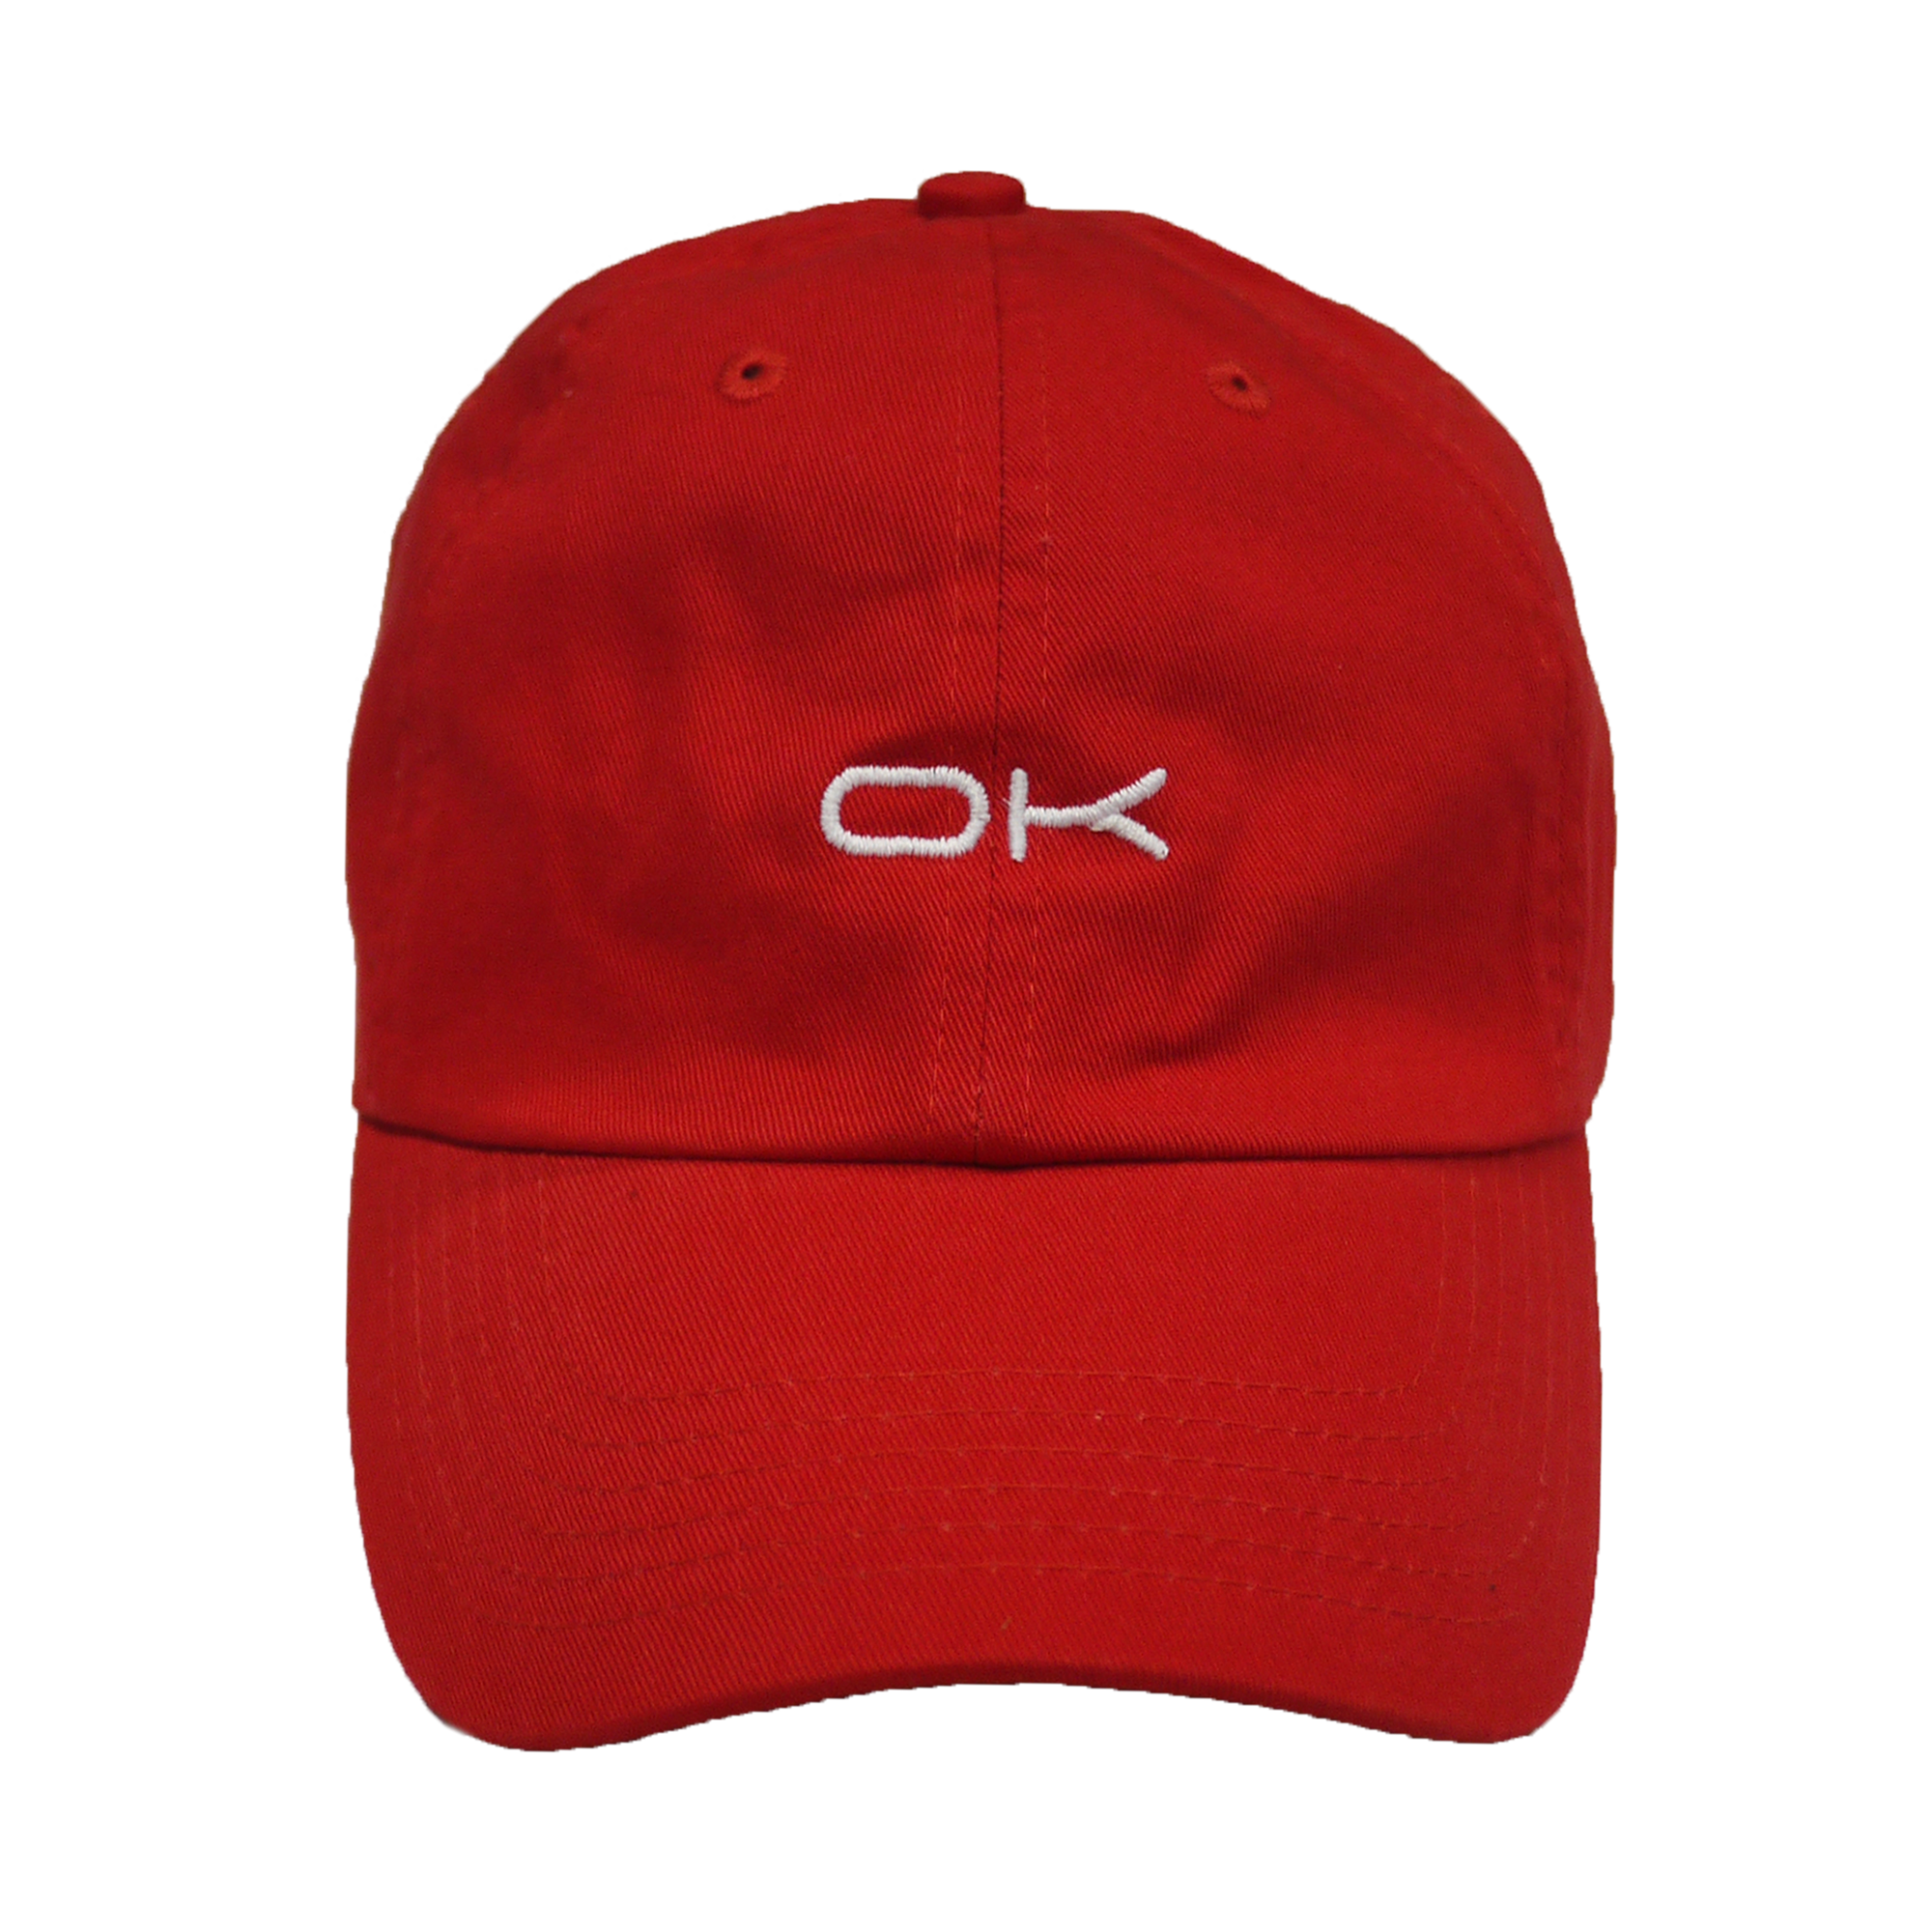 OK Red Hot Hat